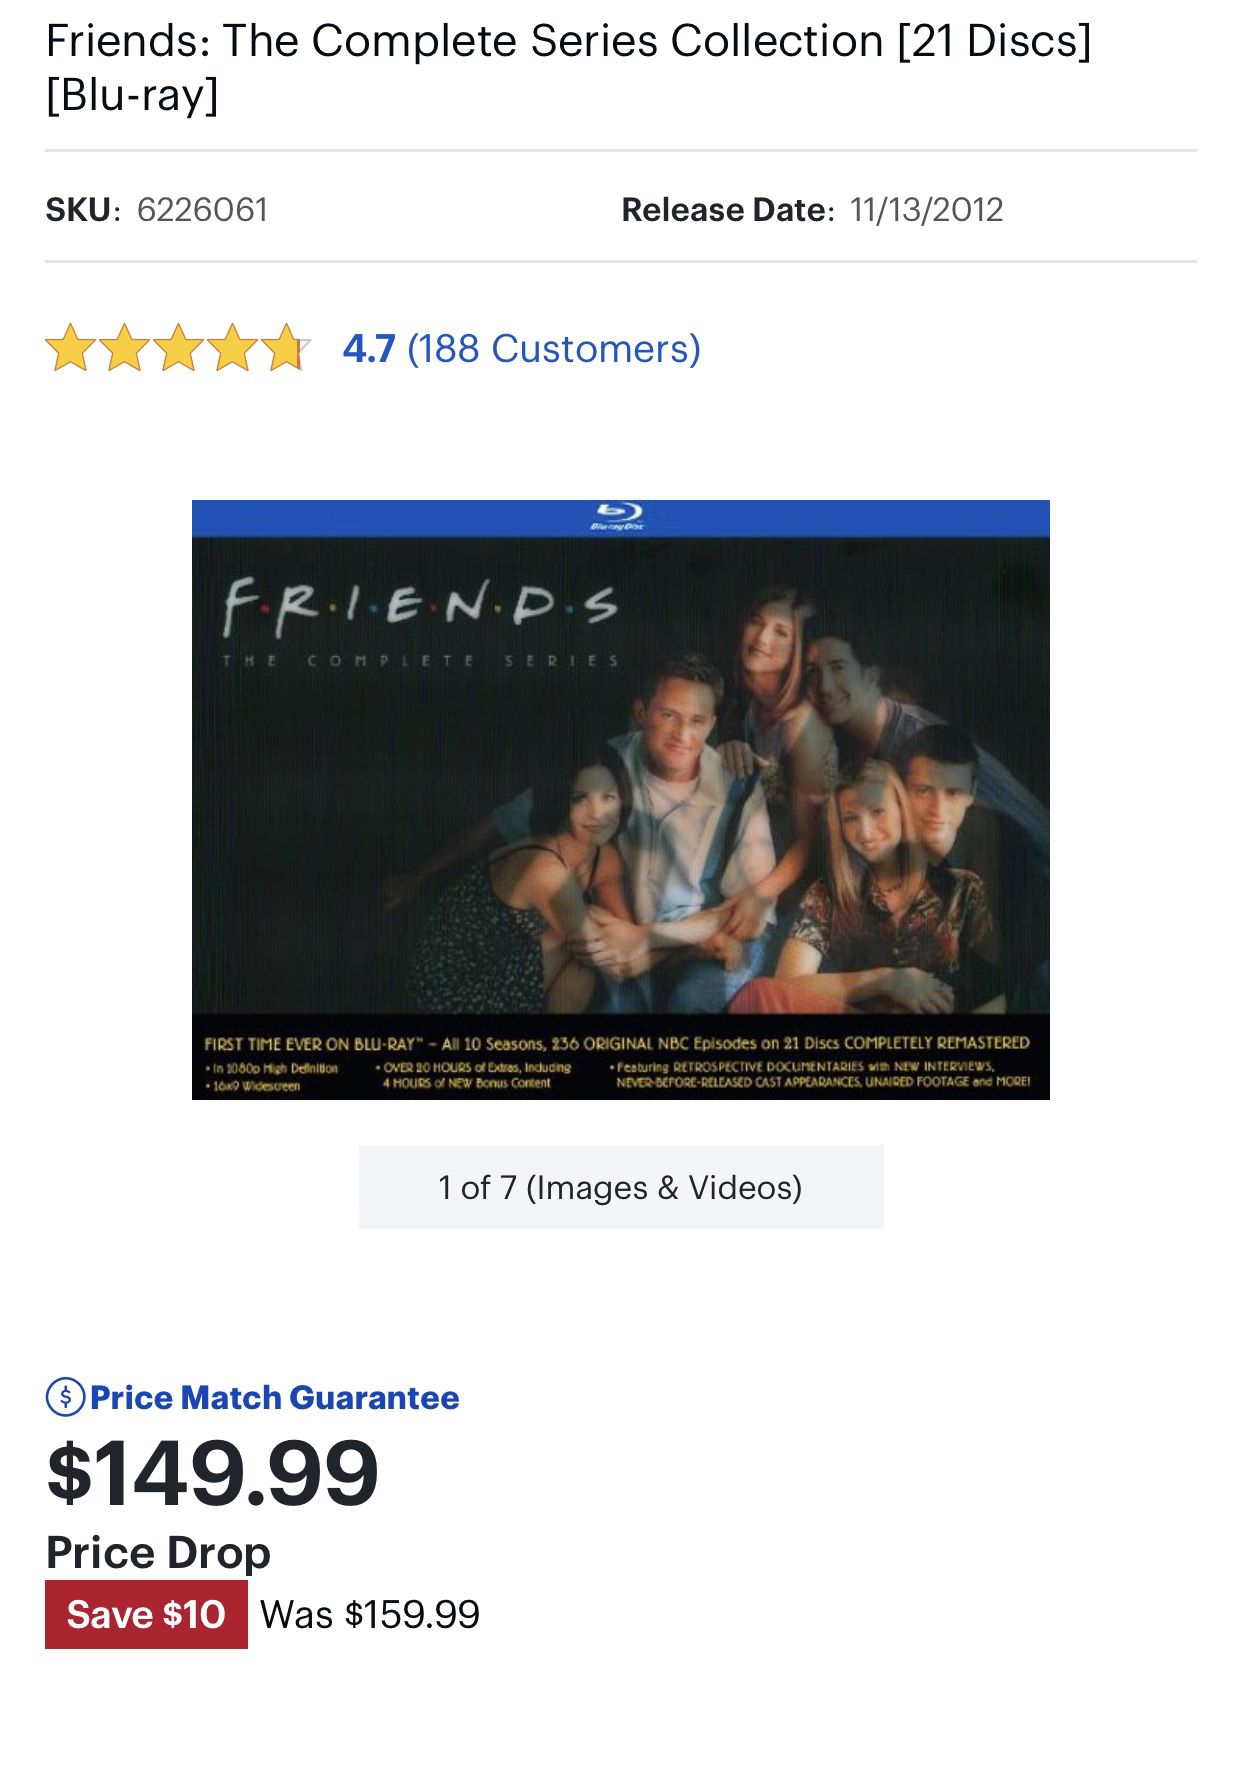 Friends Blu Ray Collection